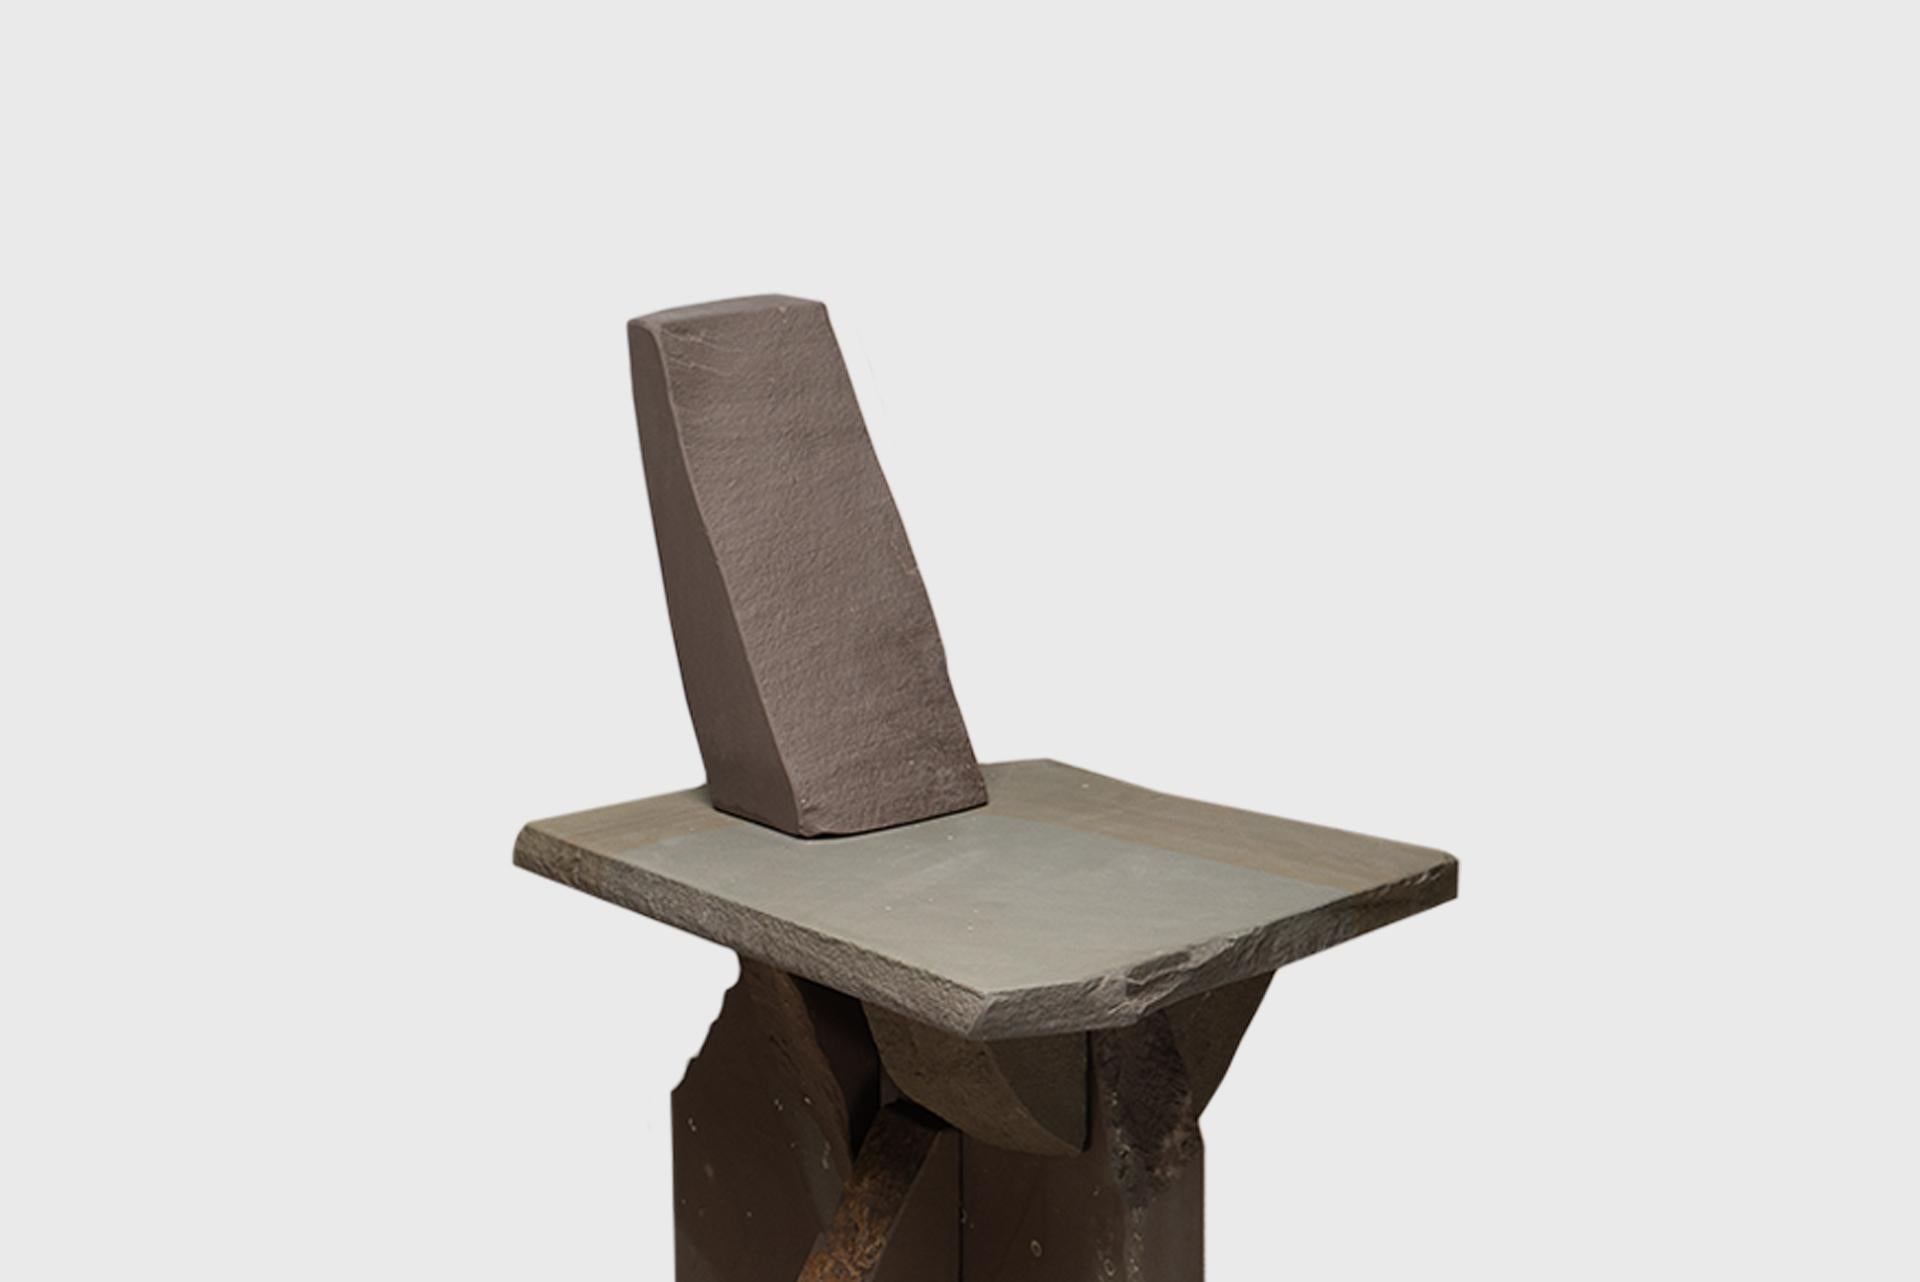 Contemporary Natural Chair 18, Graywacke Offcut Gray Stone, Carsten in der Elst For Sale 4